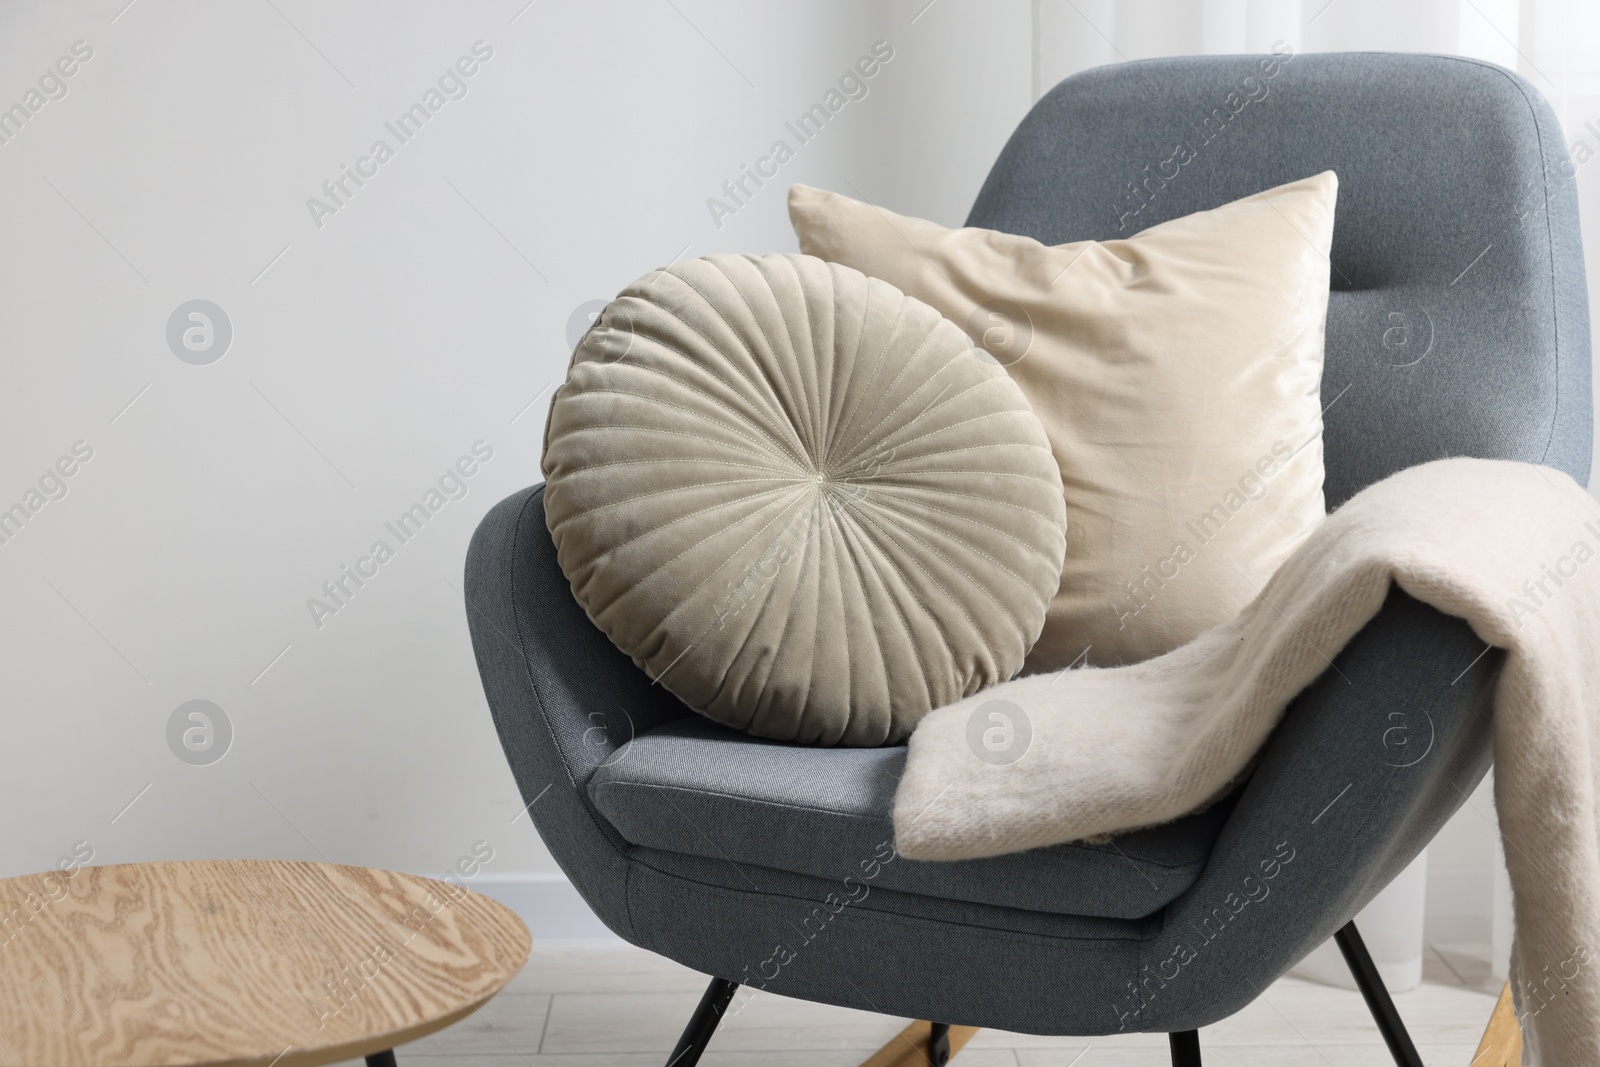 Photo of Soft pillows and blanket on rocking armchair near side table indoors